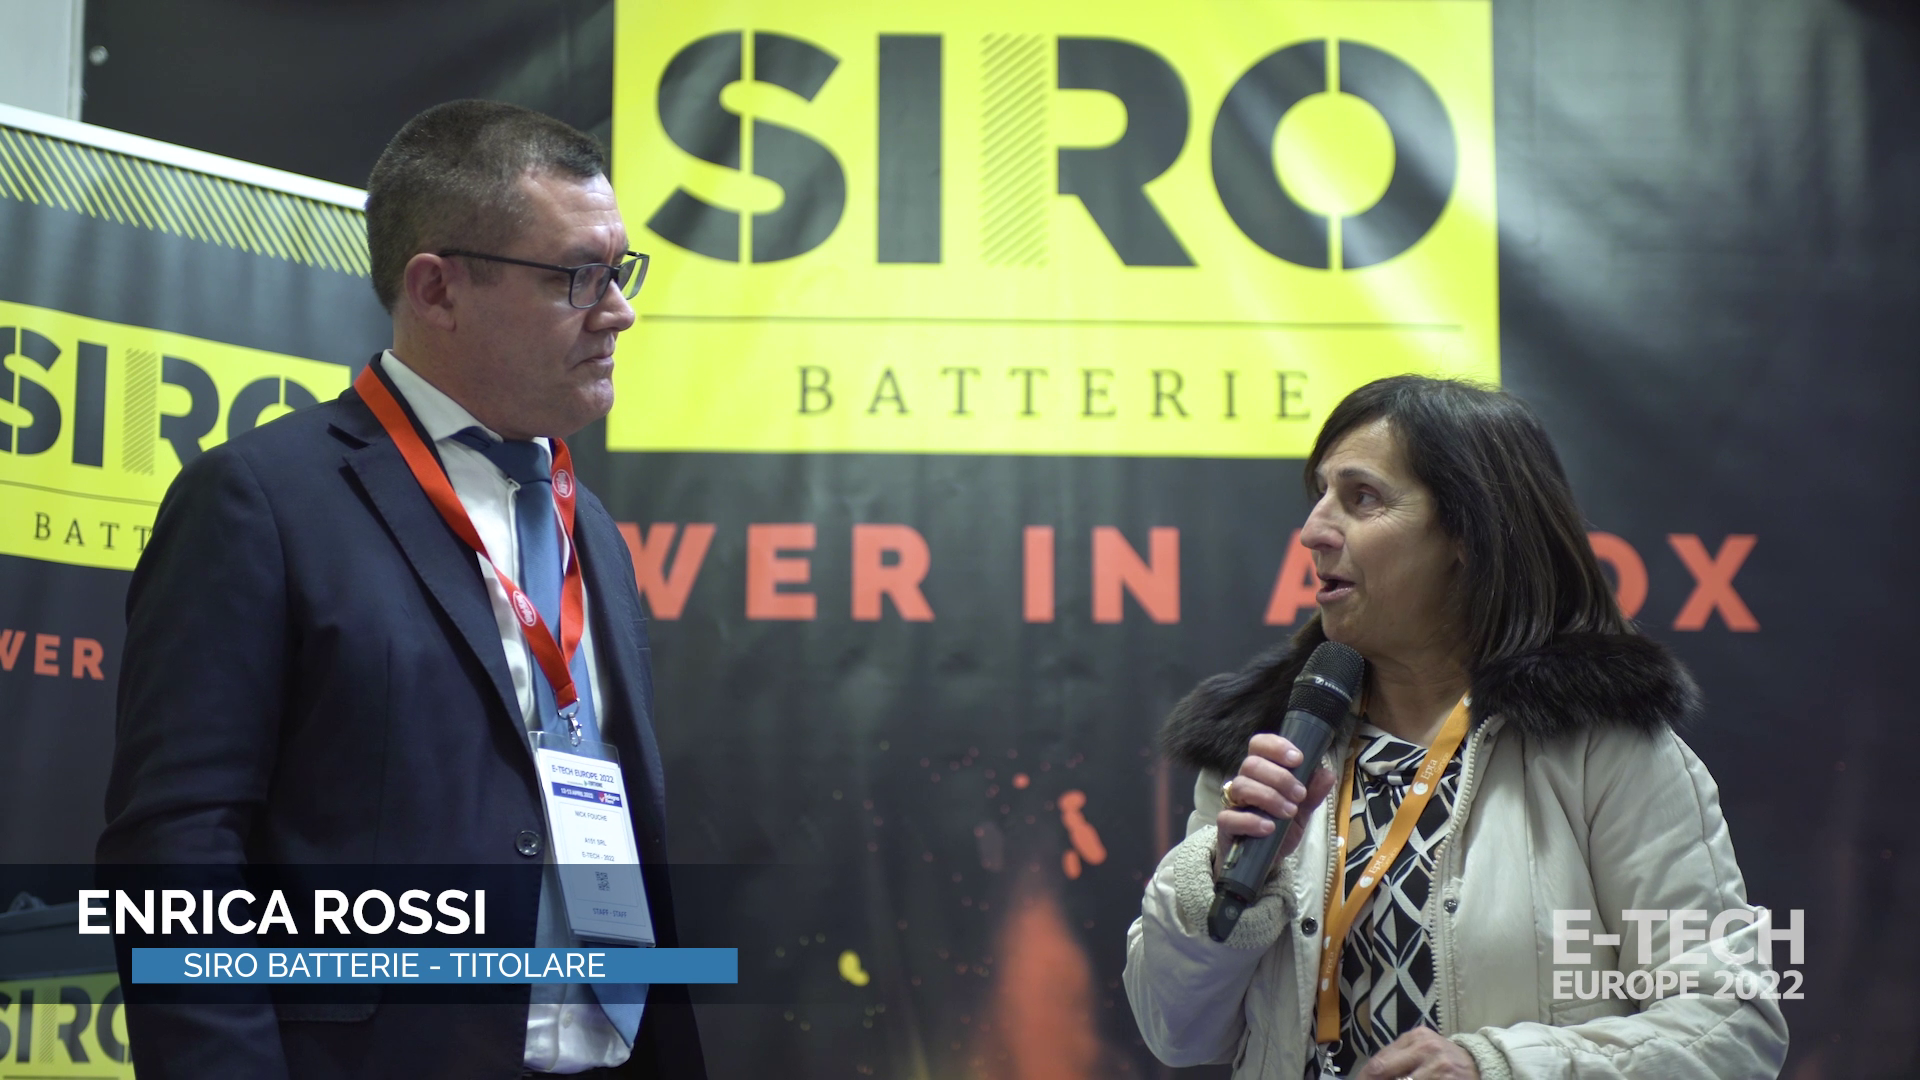 Video interview with Enrica Rossi, CEO of SIRO BATTERIE